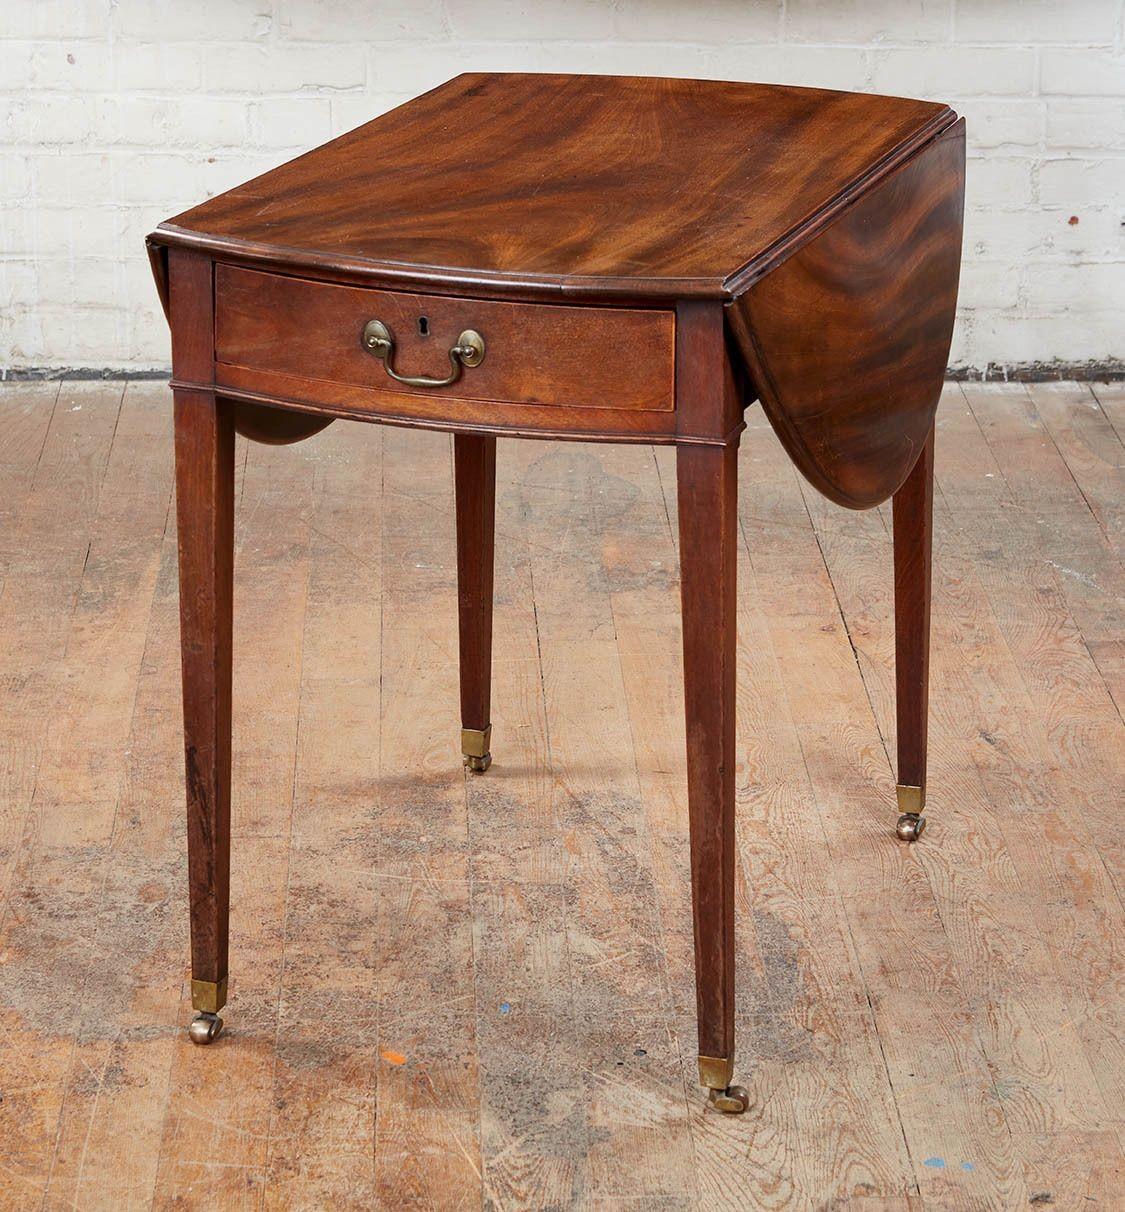 Fine George III mahogany Pembroke table, the vividly grained oval top with molded edge, over single shaped drawer retaining original hardware and standing on square tapered legs ending in original brass box casters, the whole possessing good rich